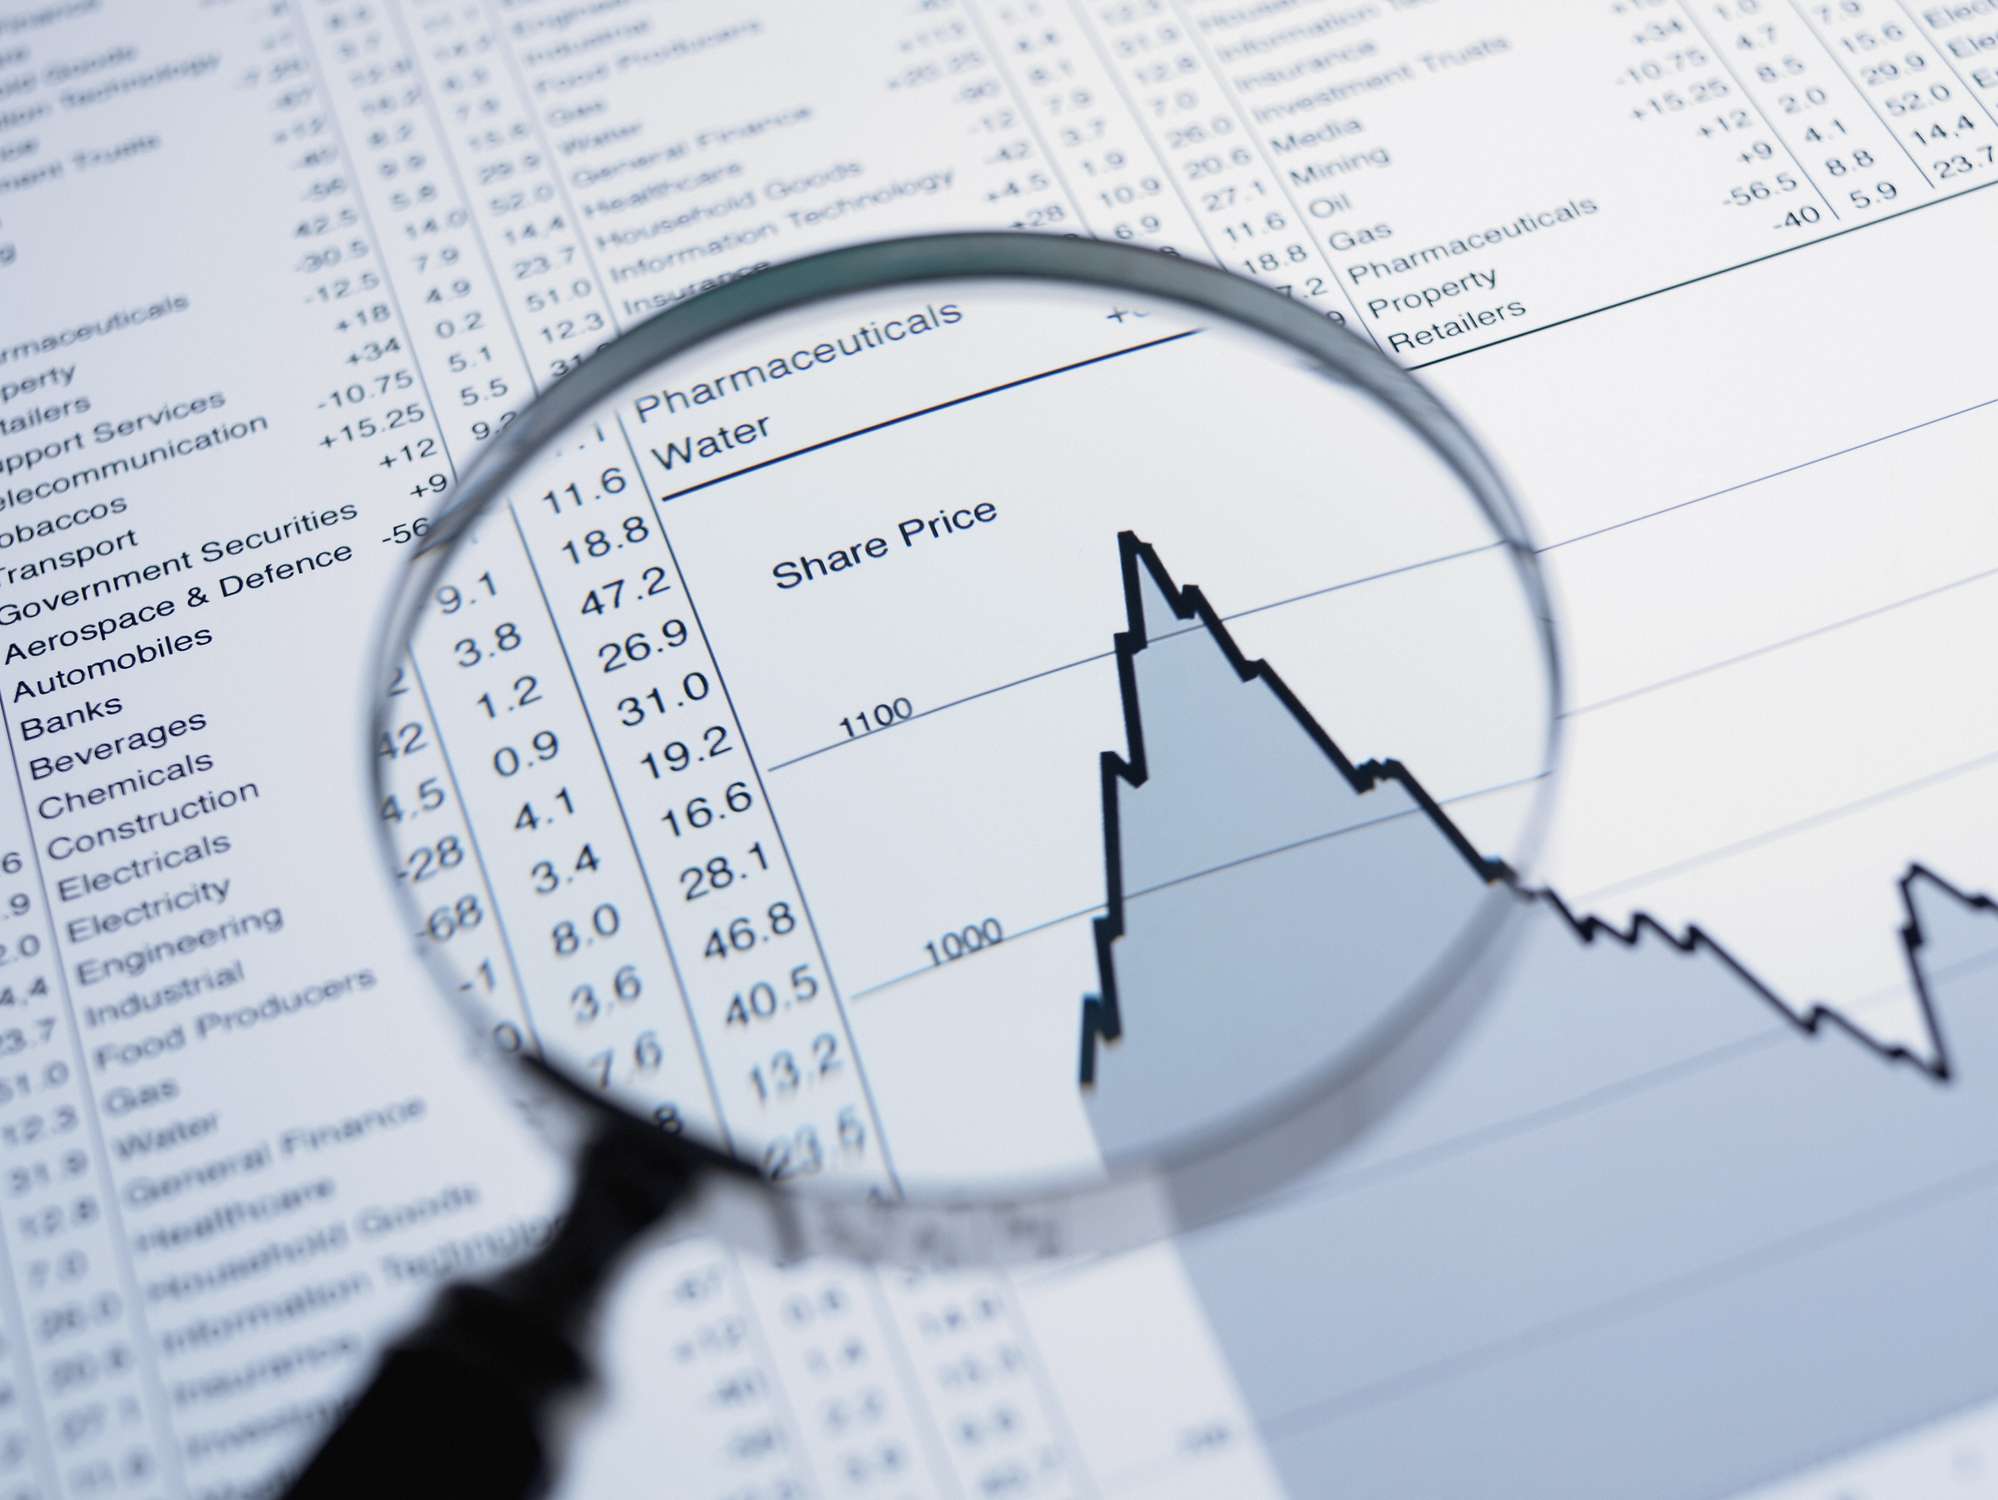 A magnifying glass and descending line graph and list of share prices.